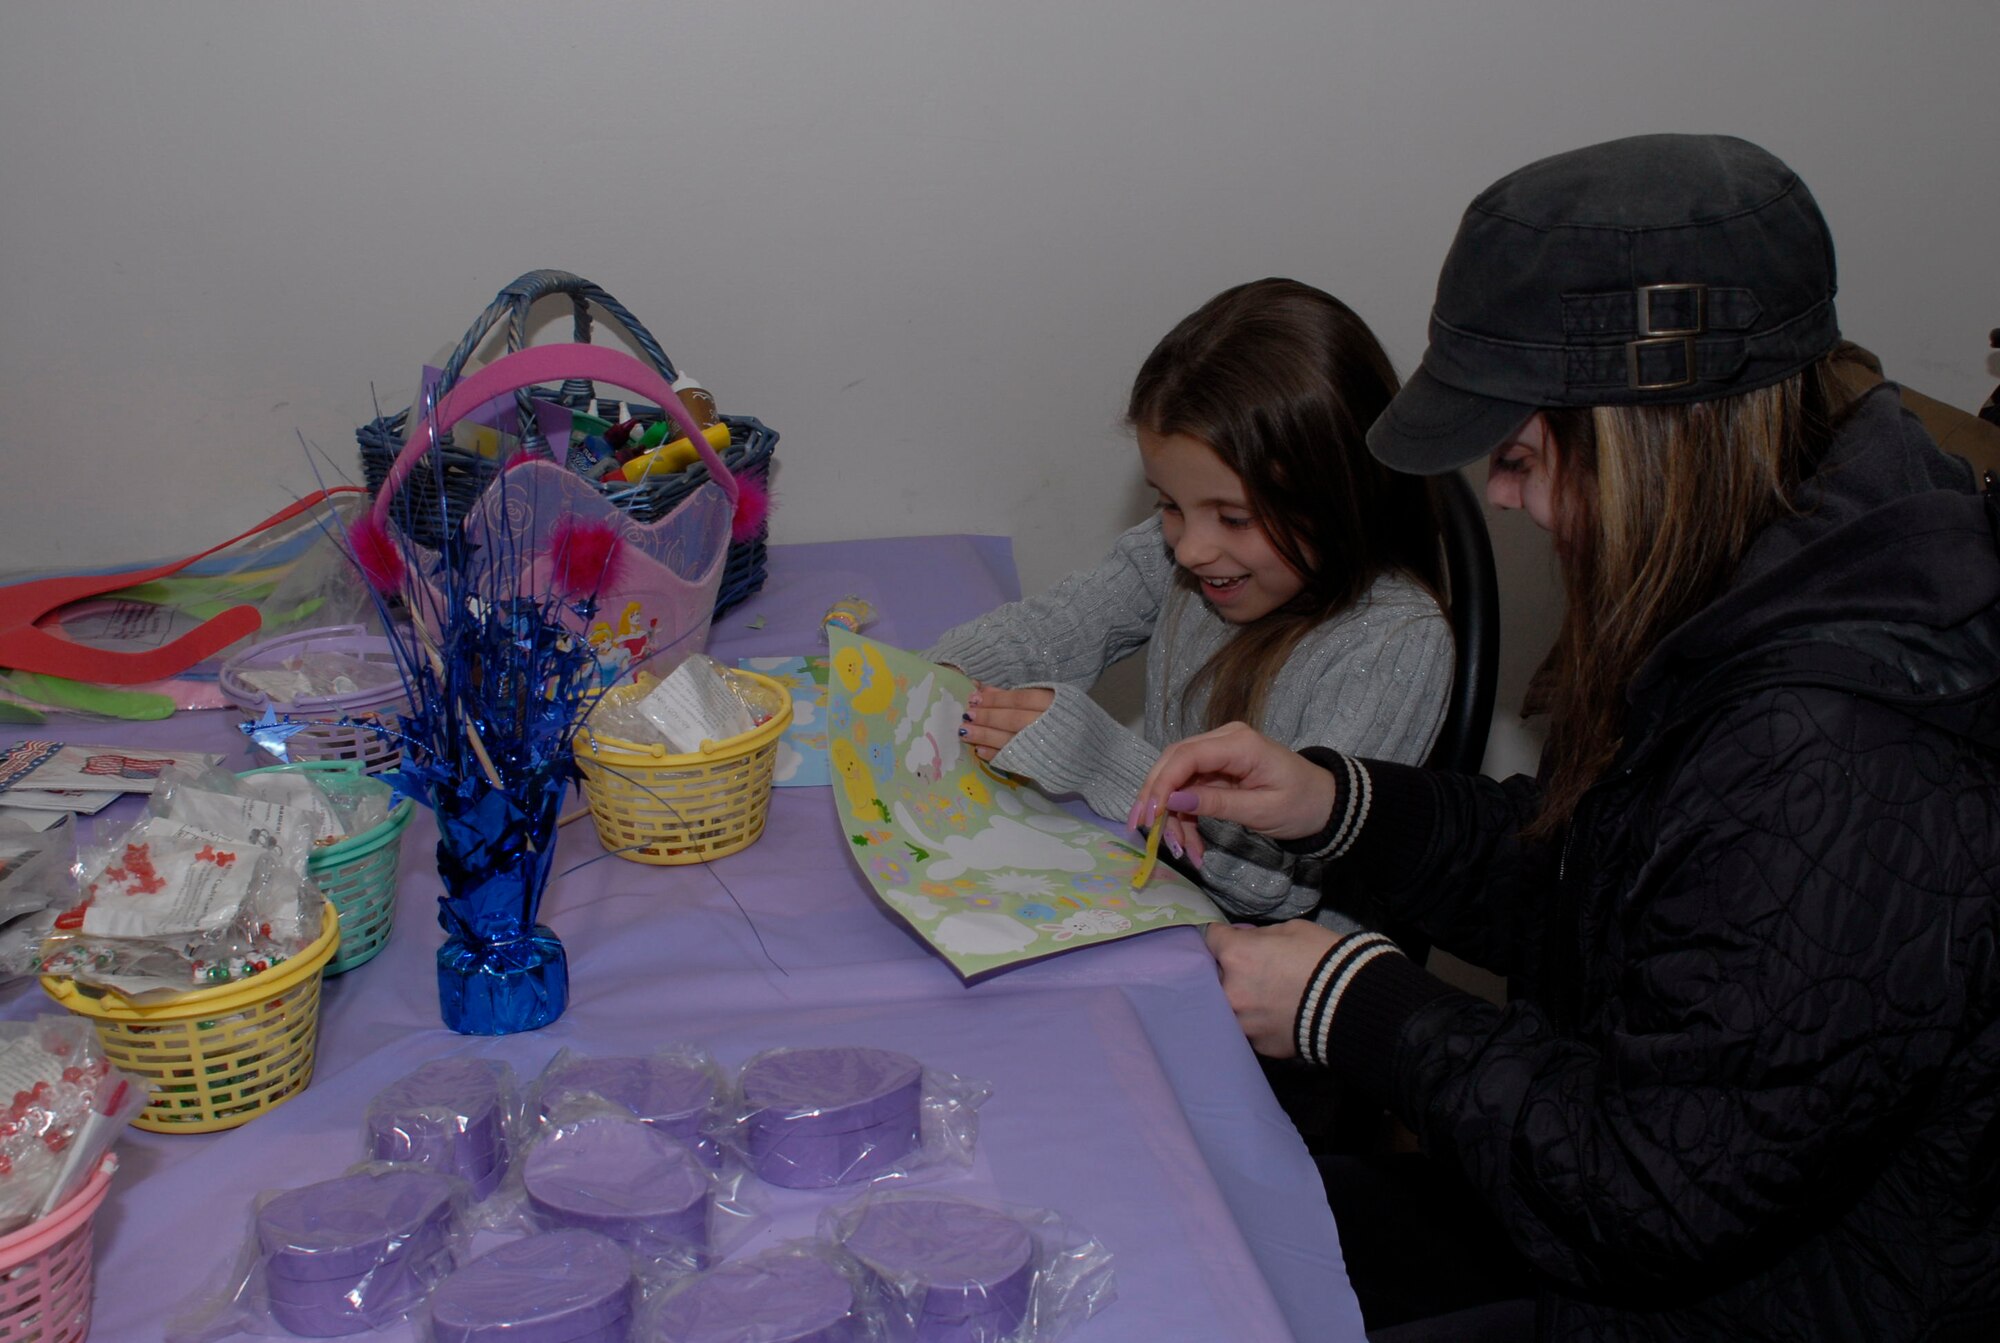 Deena Saccente applies stickers with her daughter Liya Saccente (7), at the arts and crafts table during the 103rd Airlift Wing’s annual Easter Eggstravaganza March 20, 2010, at the dining facility on base. Along with arts and crafts, the children who attended got a special visit by the Easter Bunny, hunted for eggs, participated in a raffle of toys. (U.S. Air Force Photo by Staff Sgt. Erin McNamara)
